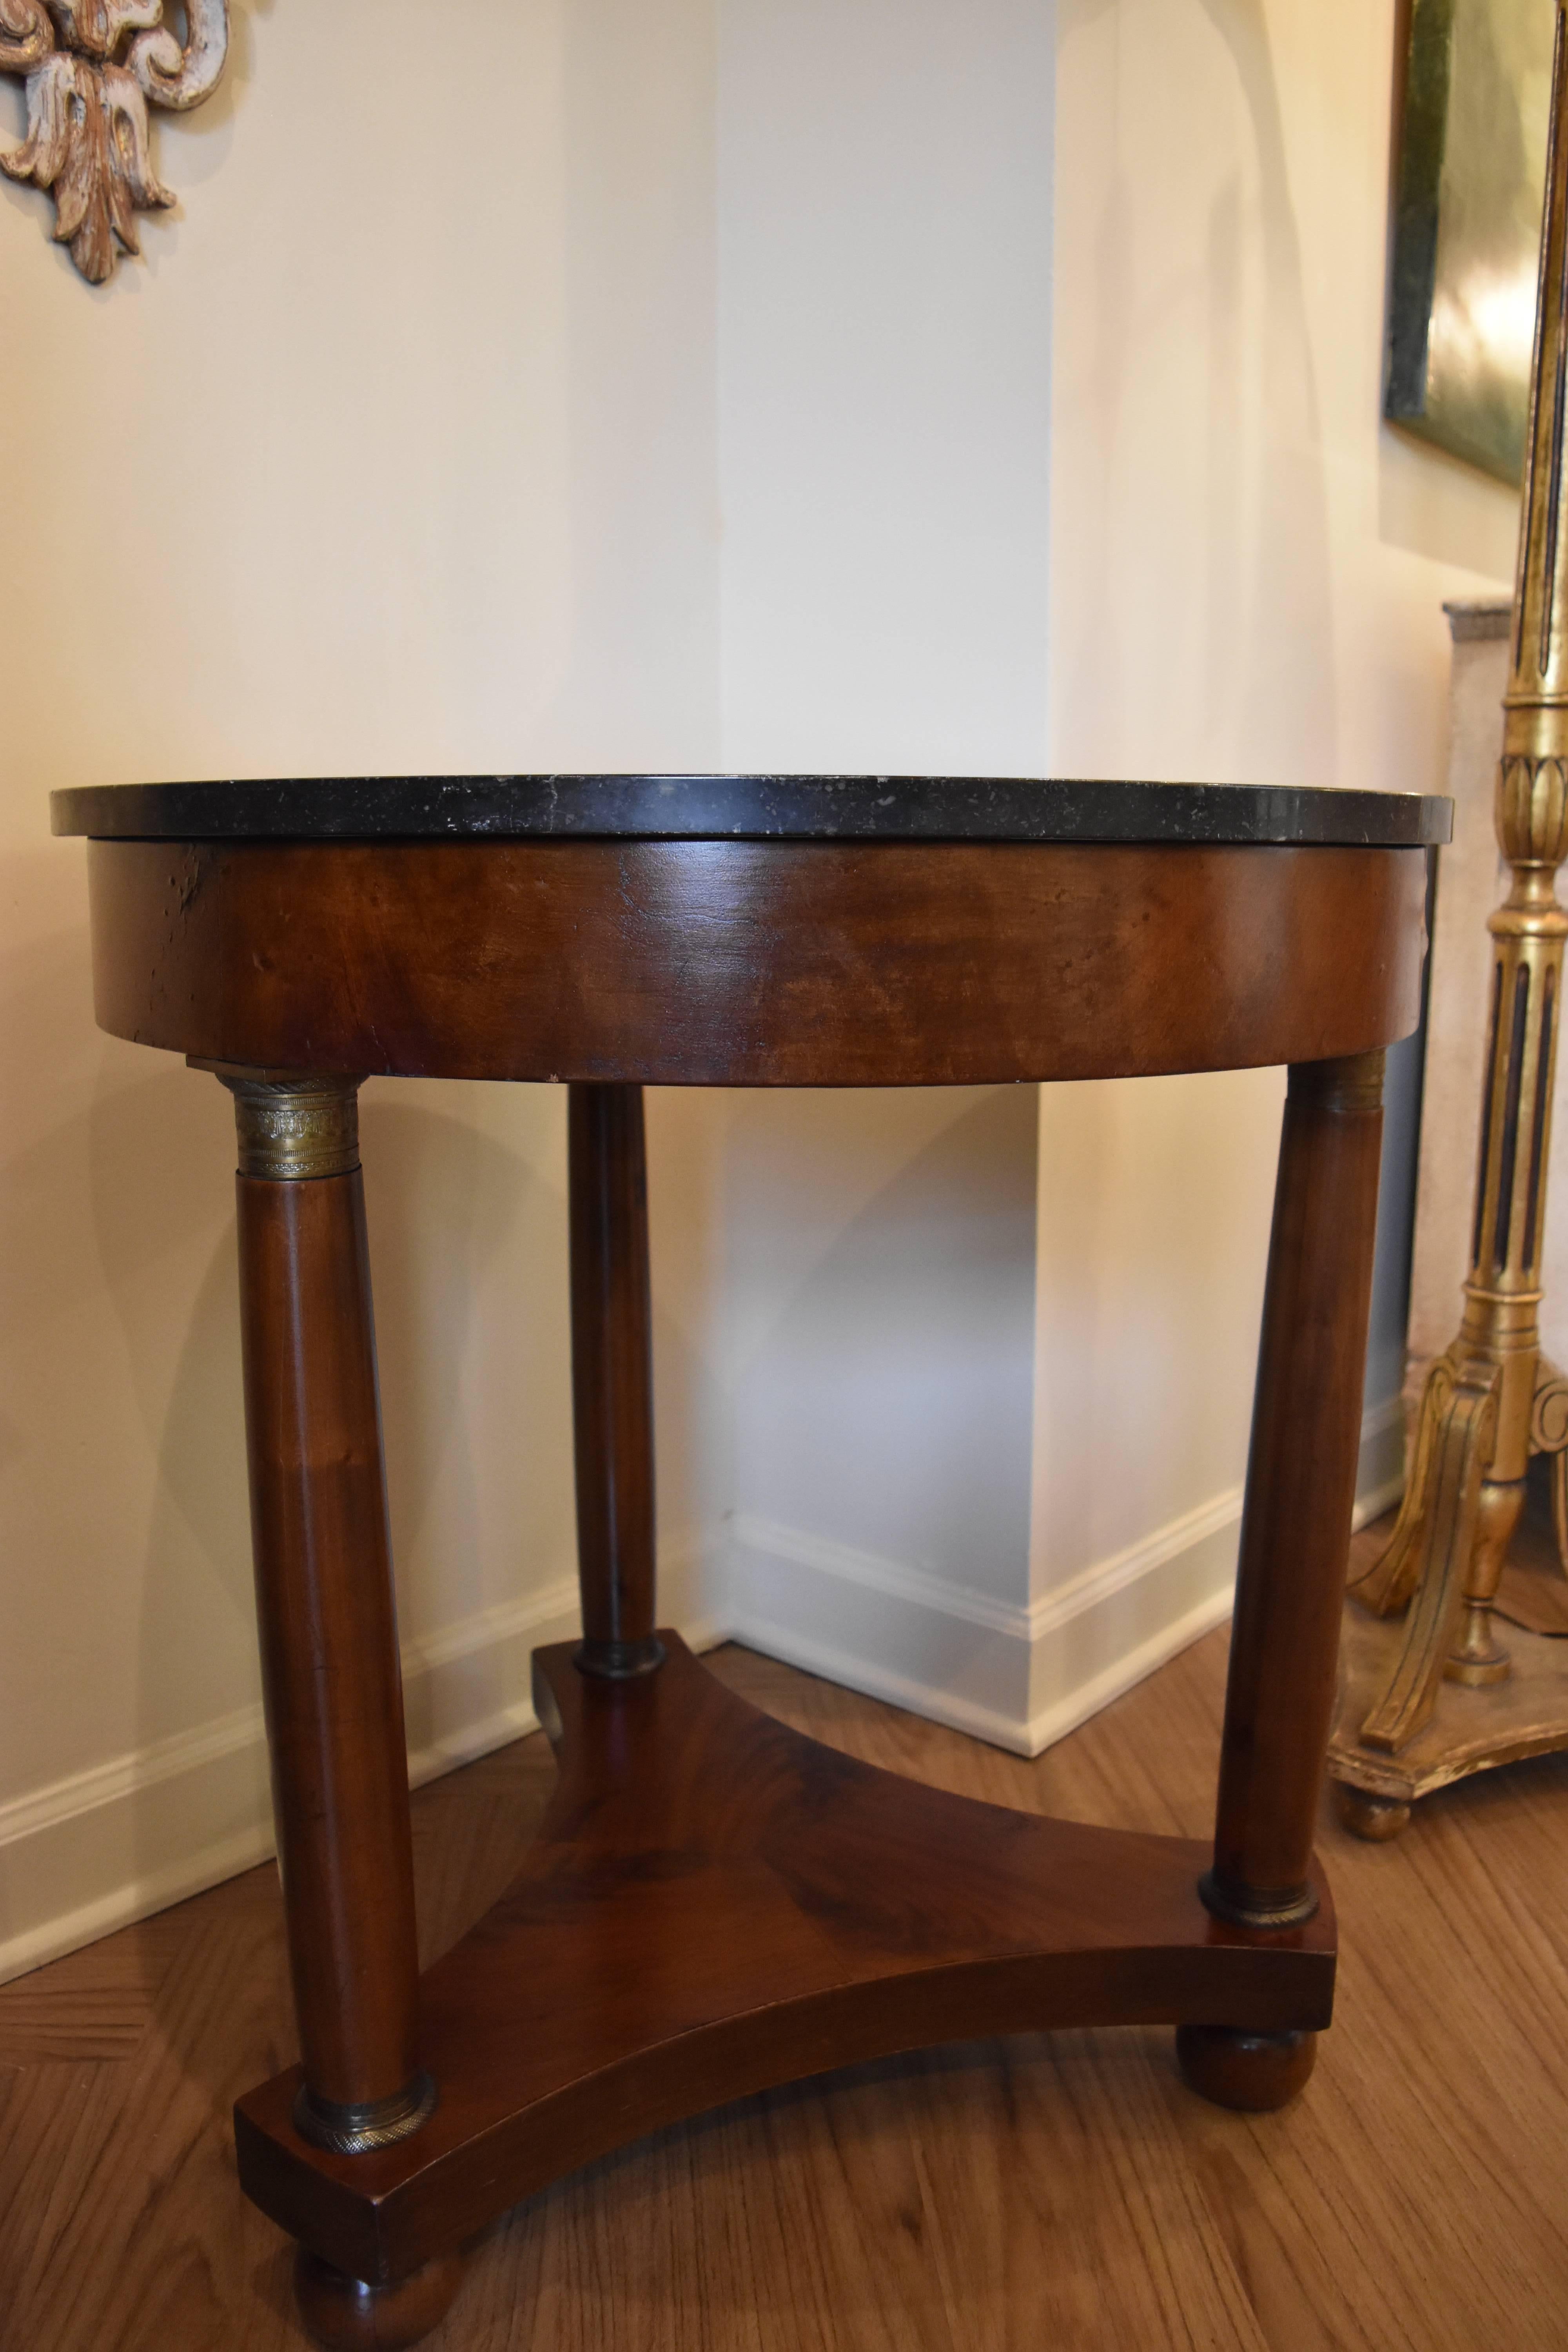 This walnut Gueridon table has a tripod base and bronze detailing at the top and bottom of each leg. The marble is black with several minor scratches. The veneer around the apron has several bubbles as shown in one of the photos.